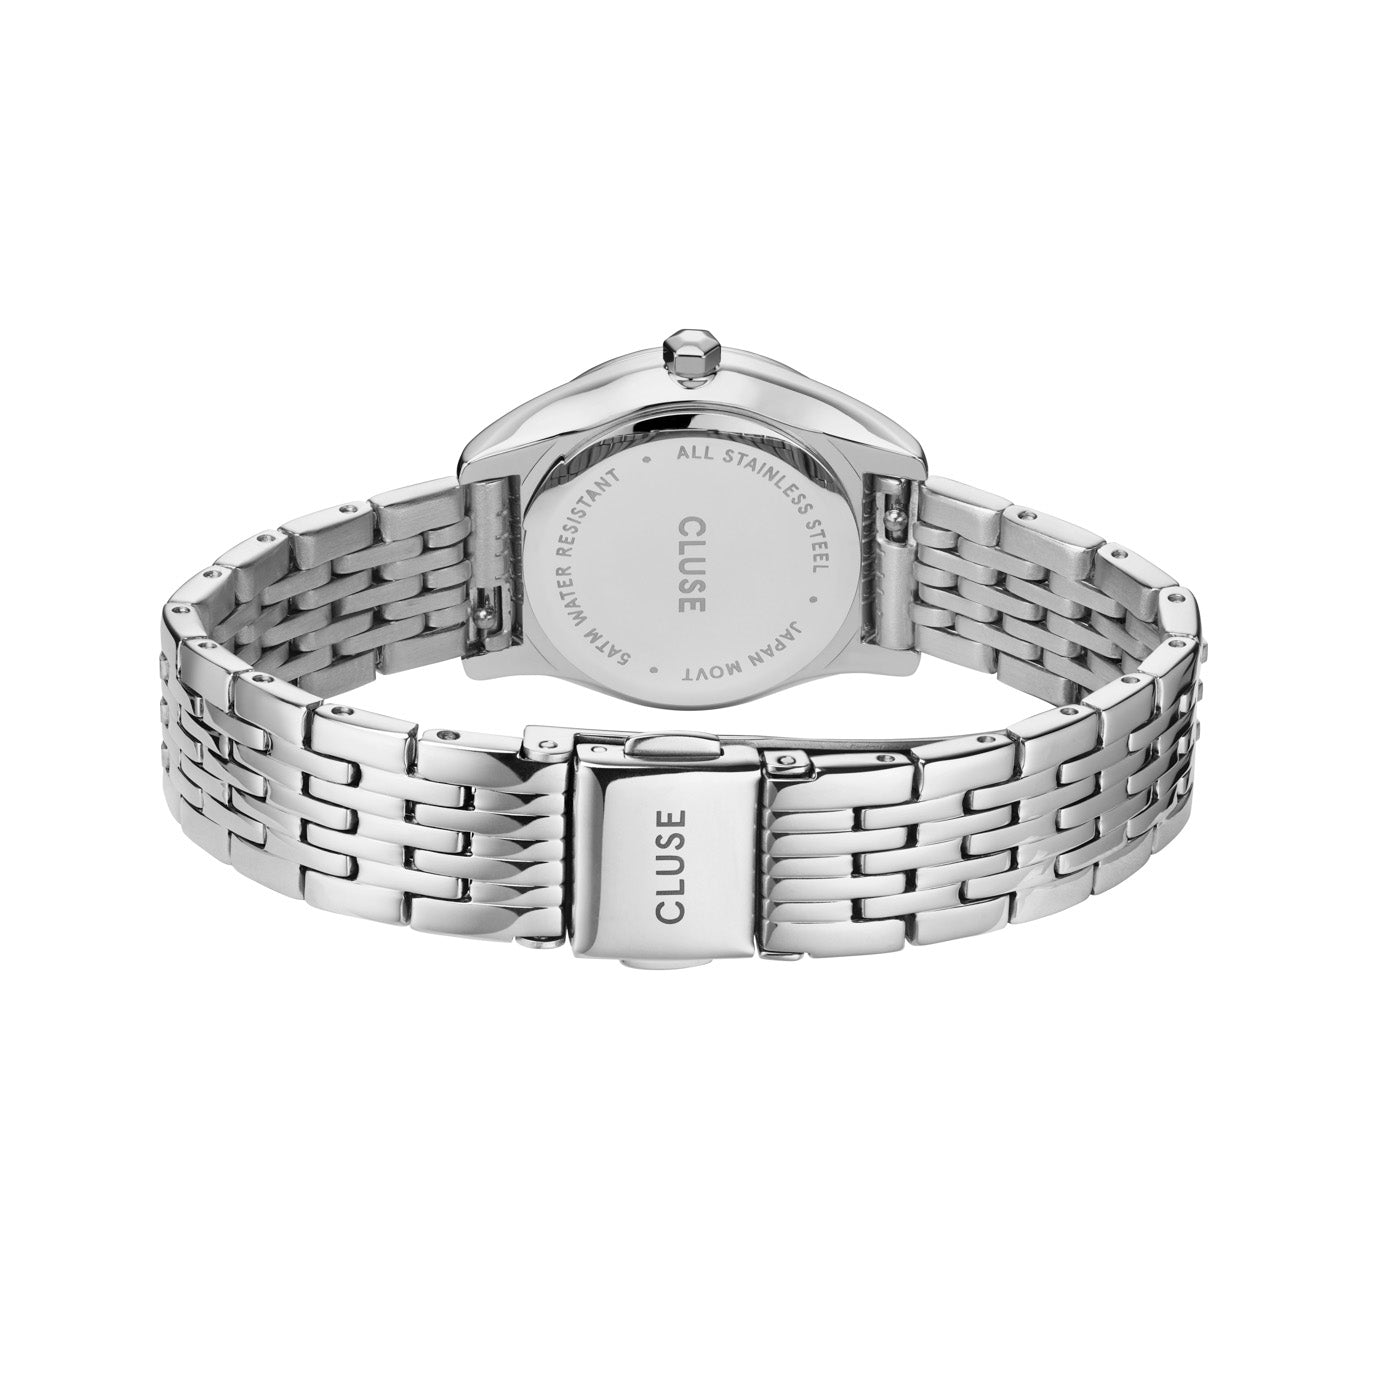 Cluse 25mm Féroce White Dial Stainless Steel Link Watch